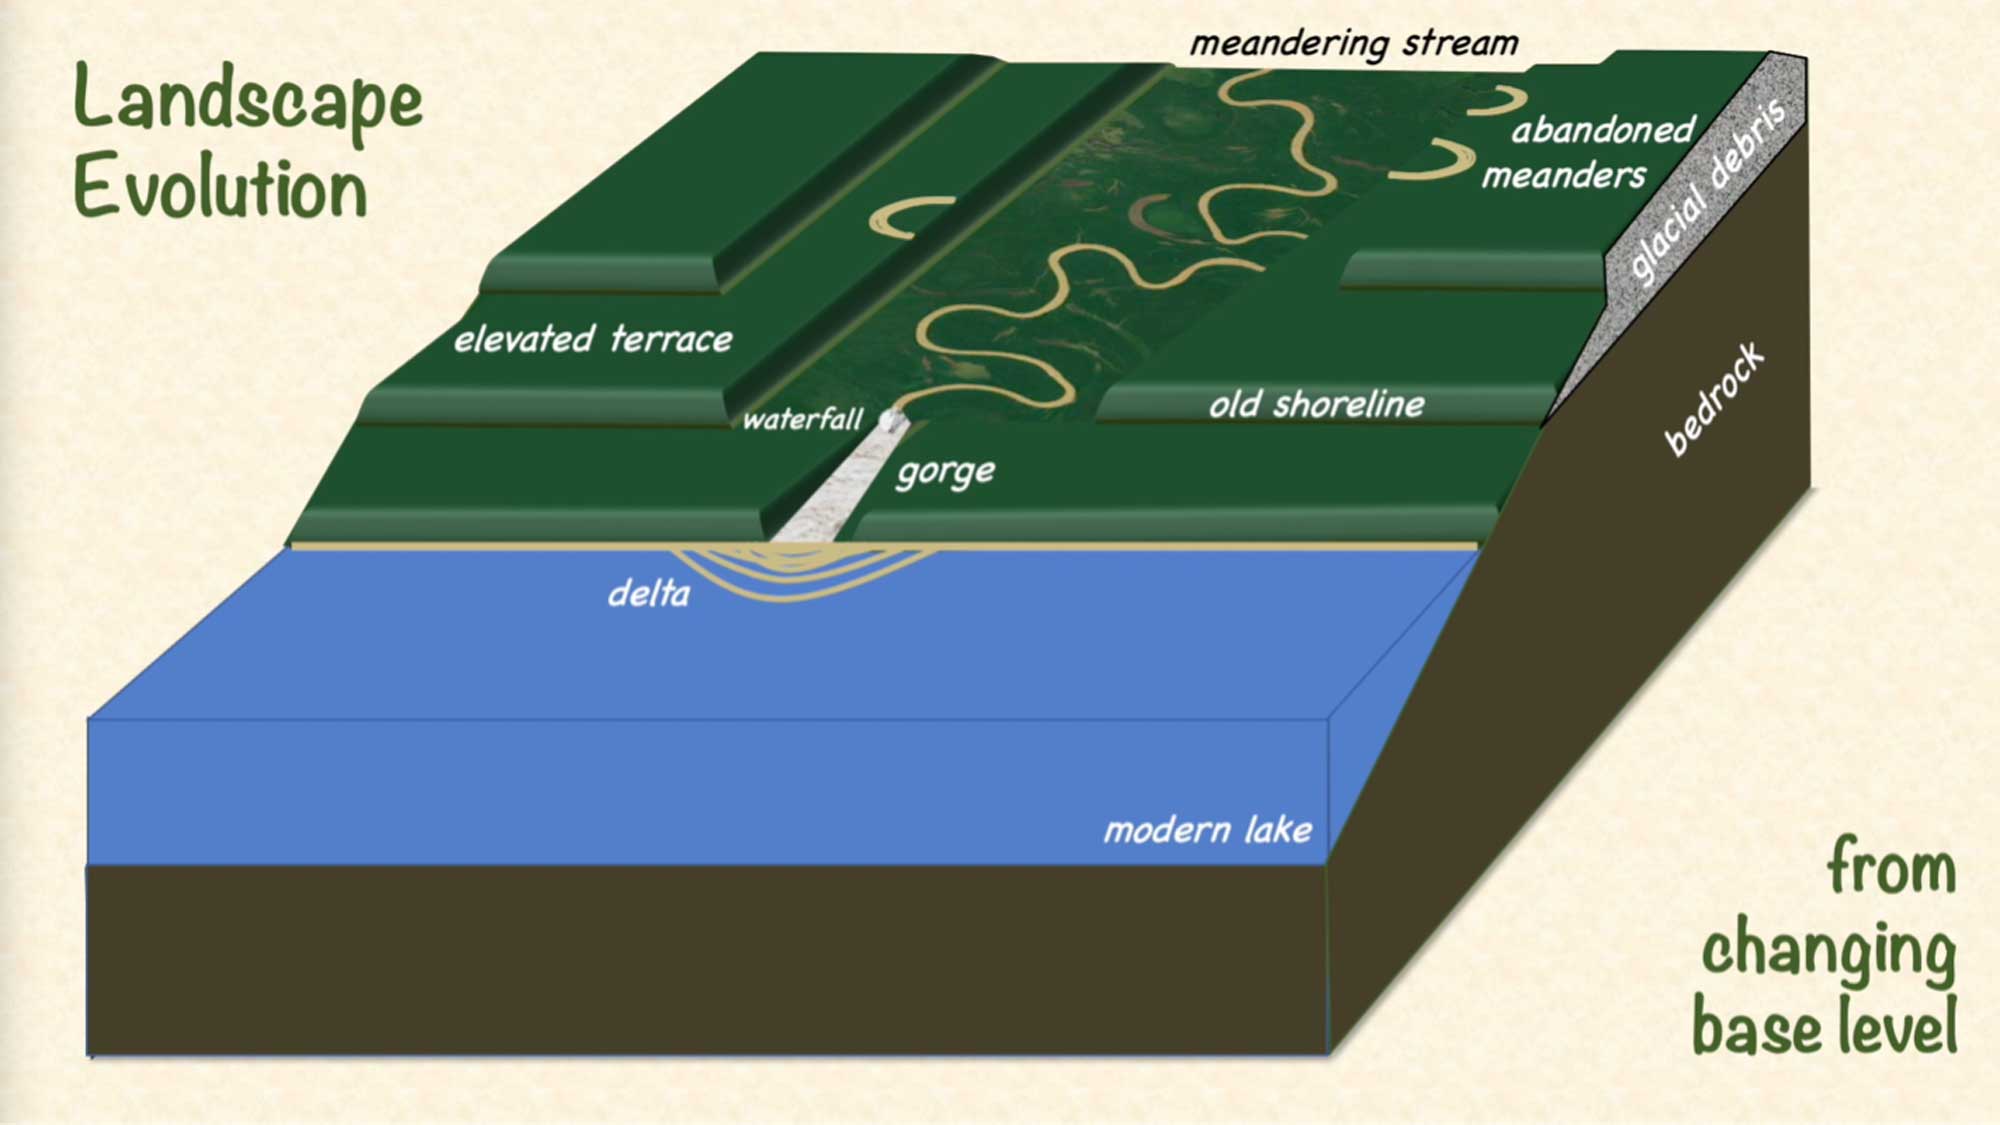 Diagram depicting how episodic drops in lake levels creates terraces and abandoned stream channels in the landscape.